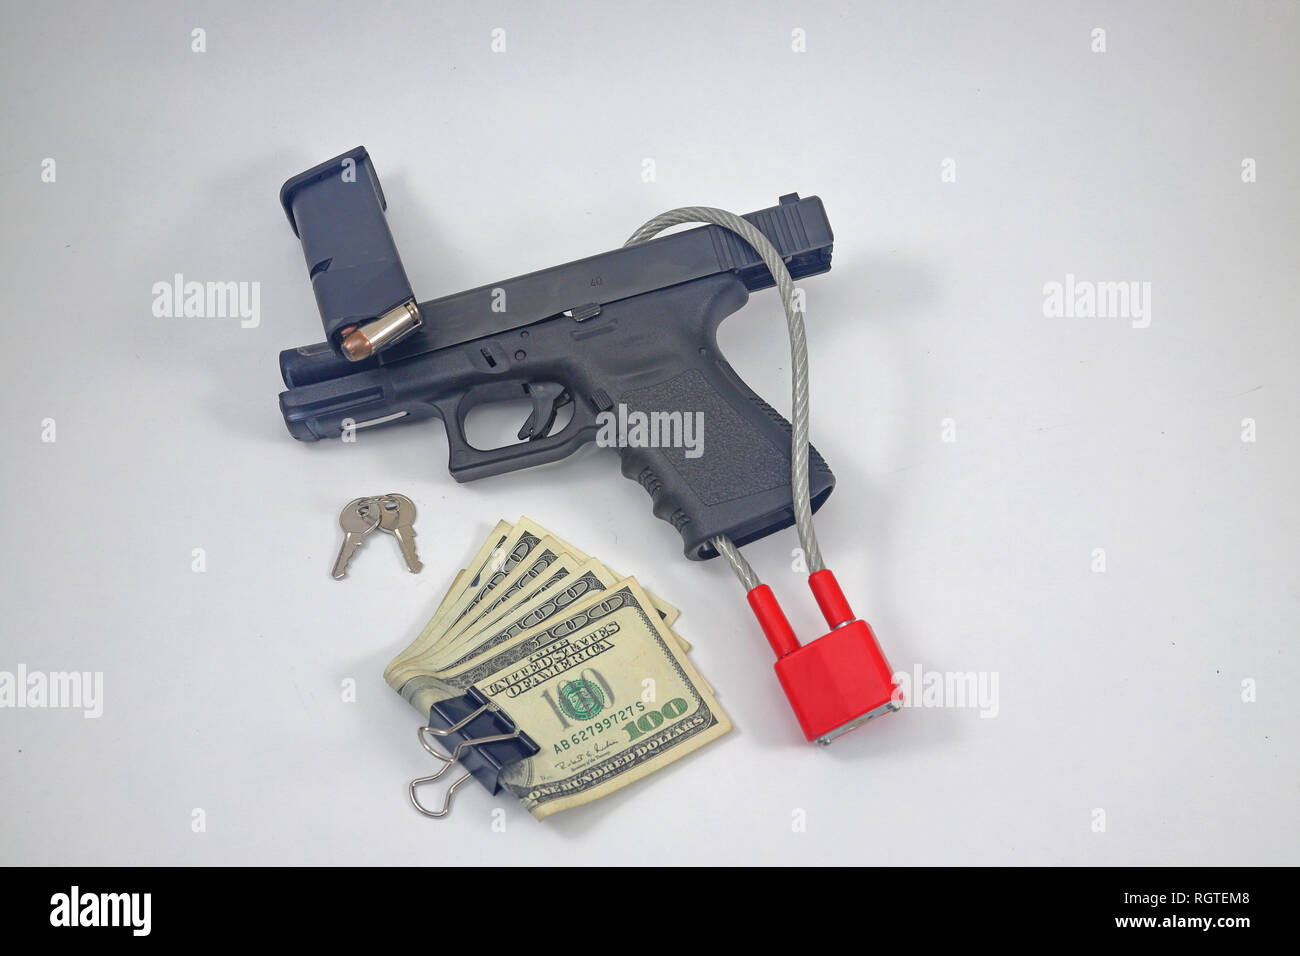 Pistol with lock, open chamber and cash money Stock Photo